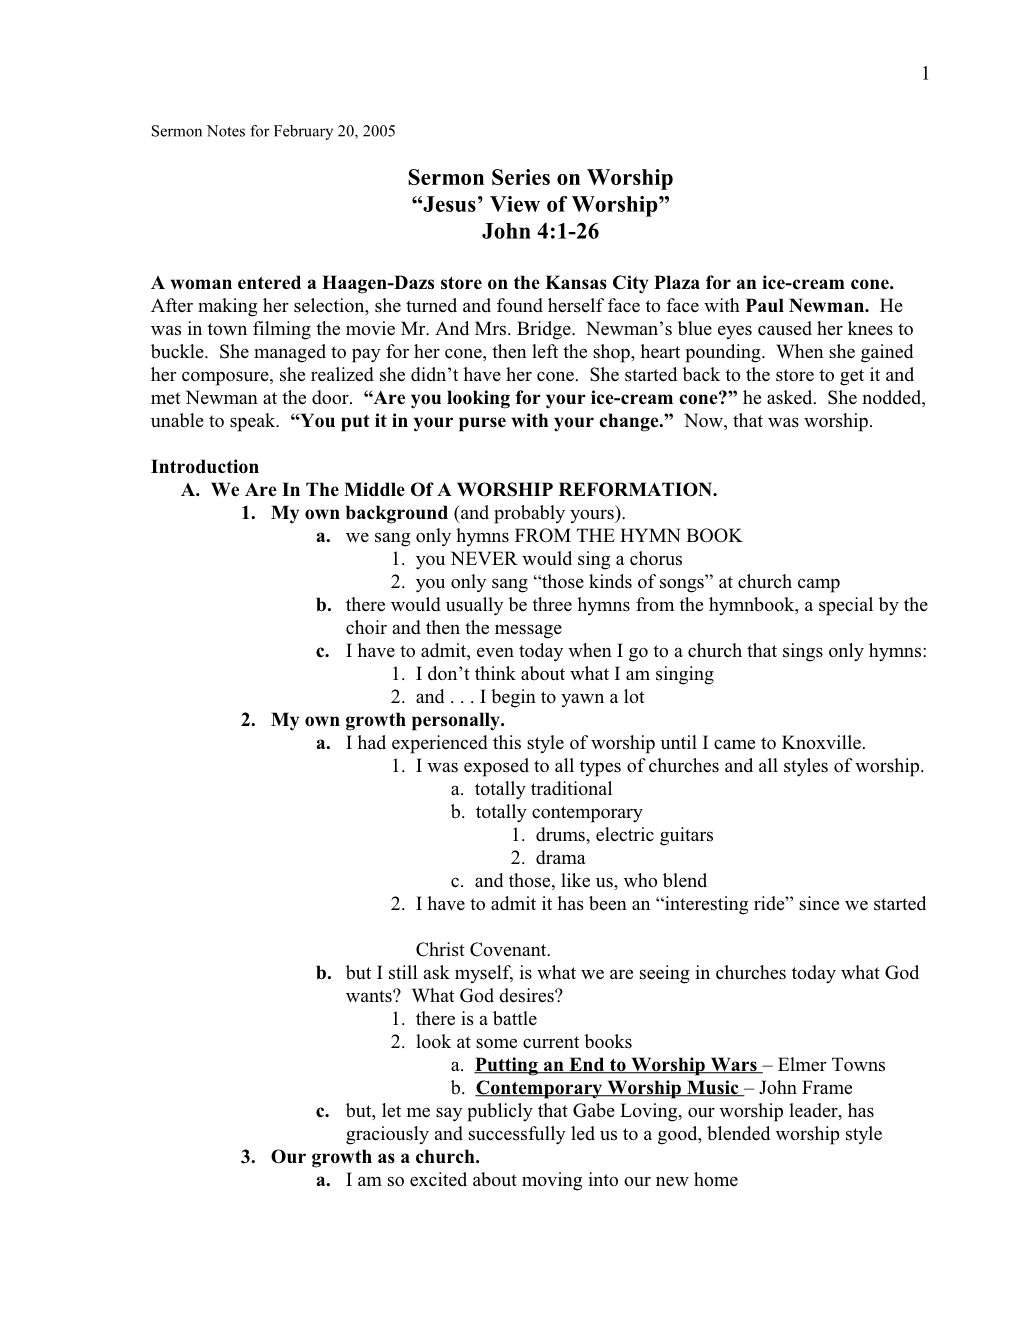 Sermon Notes for February 20, 2005